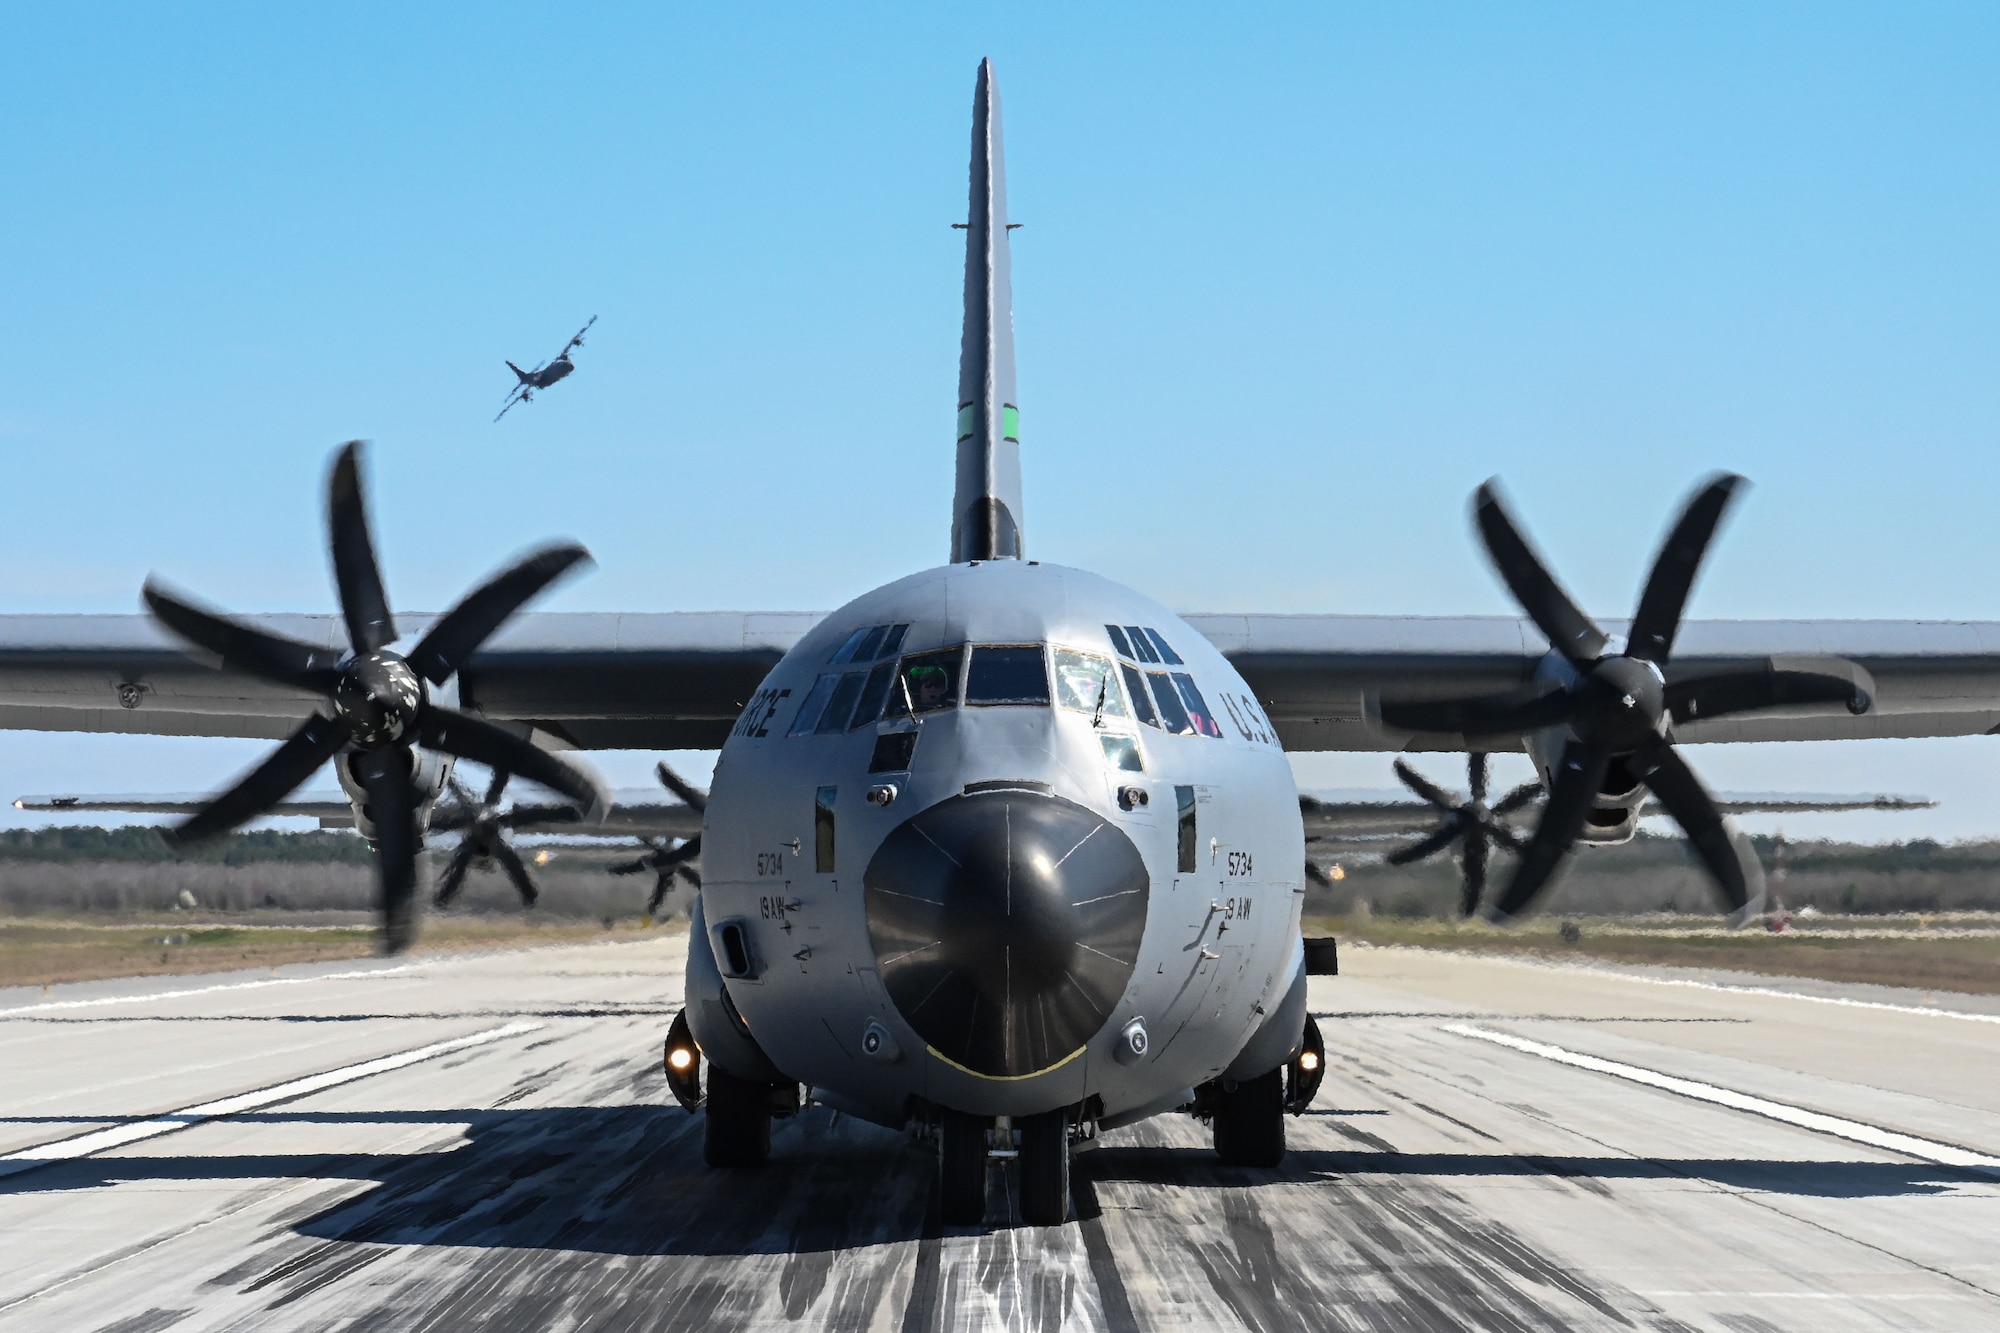 C130 taxi on the runway